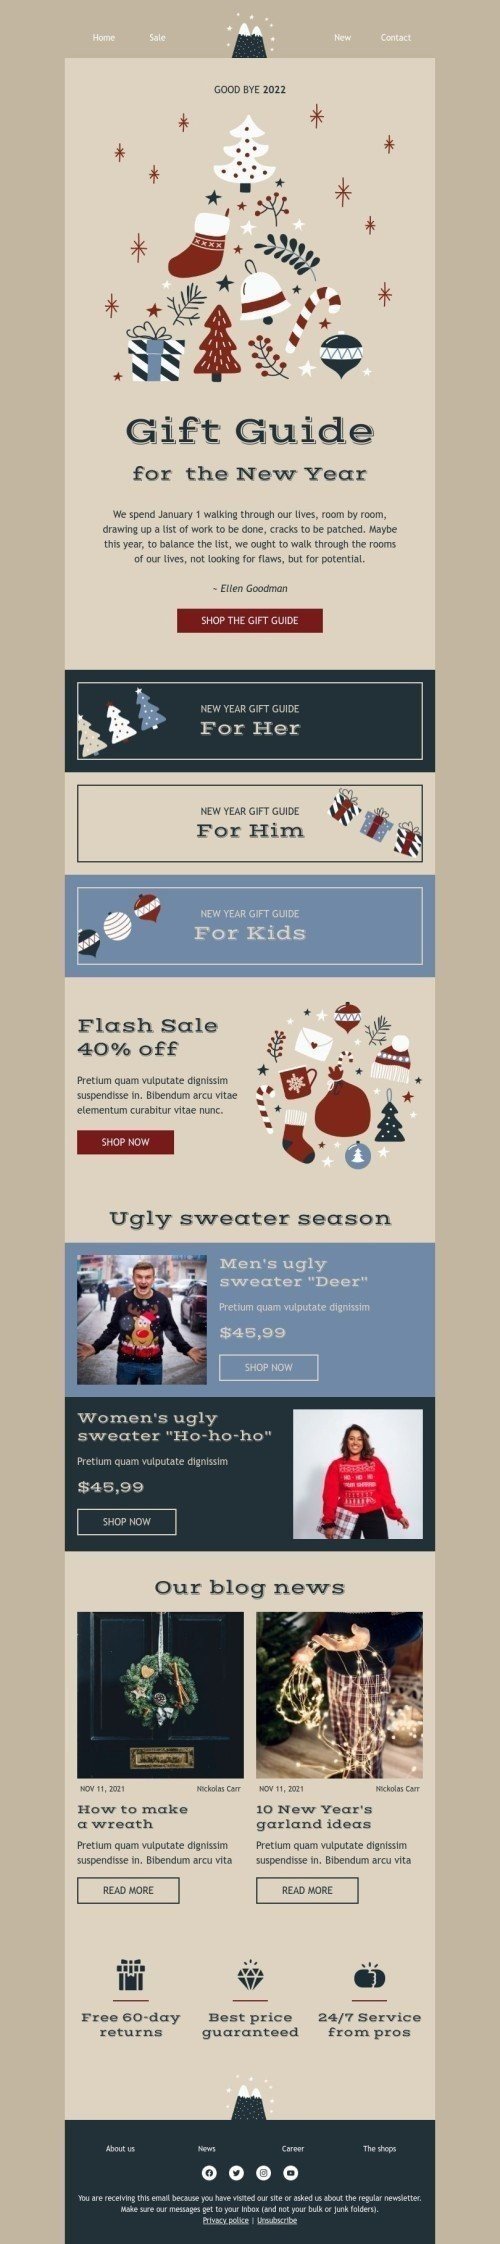 New Year email template "Gift guide ​for New Year" for fashion industry desktop view